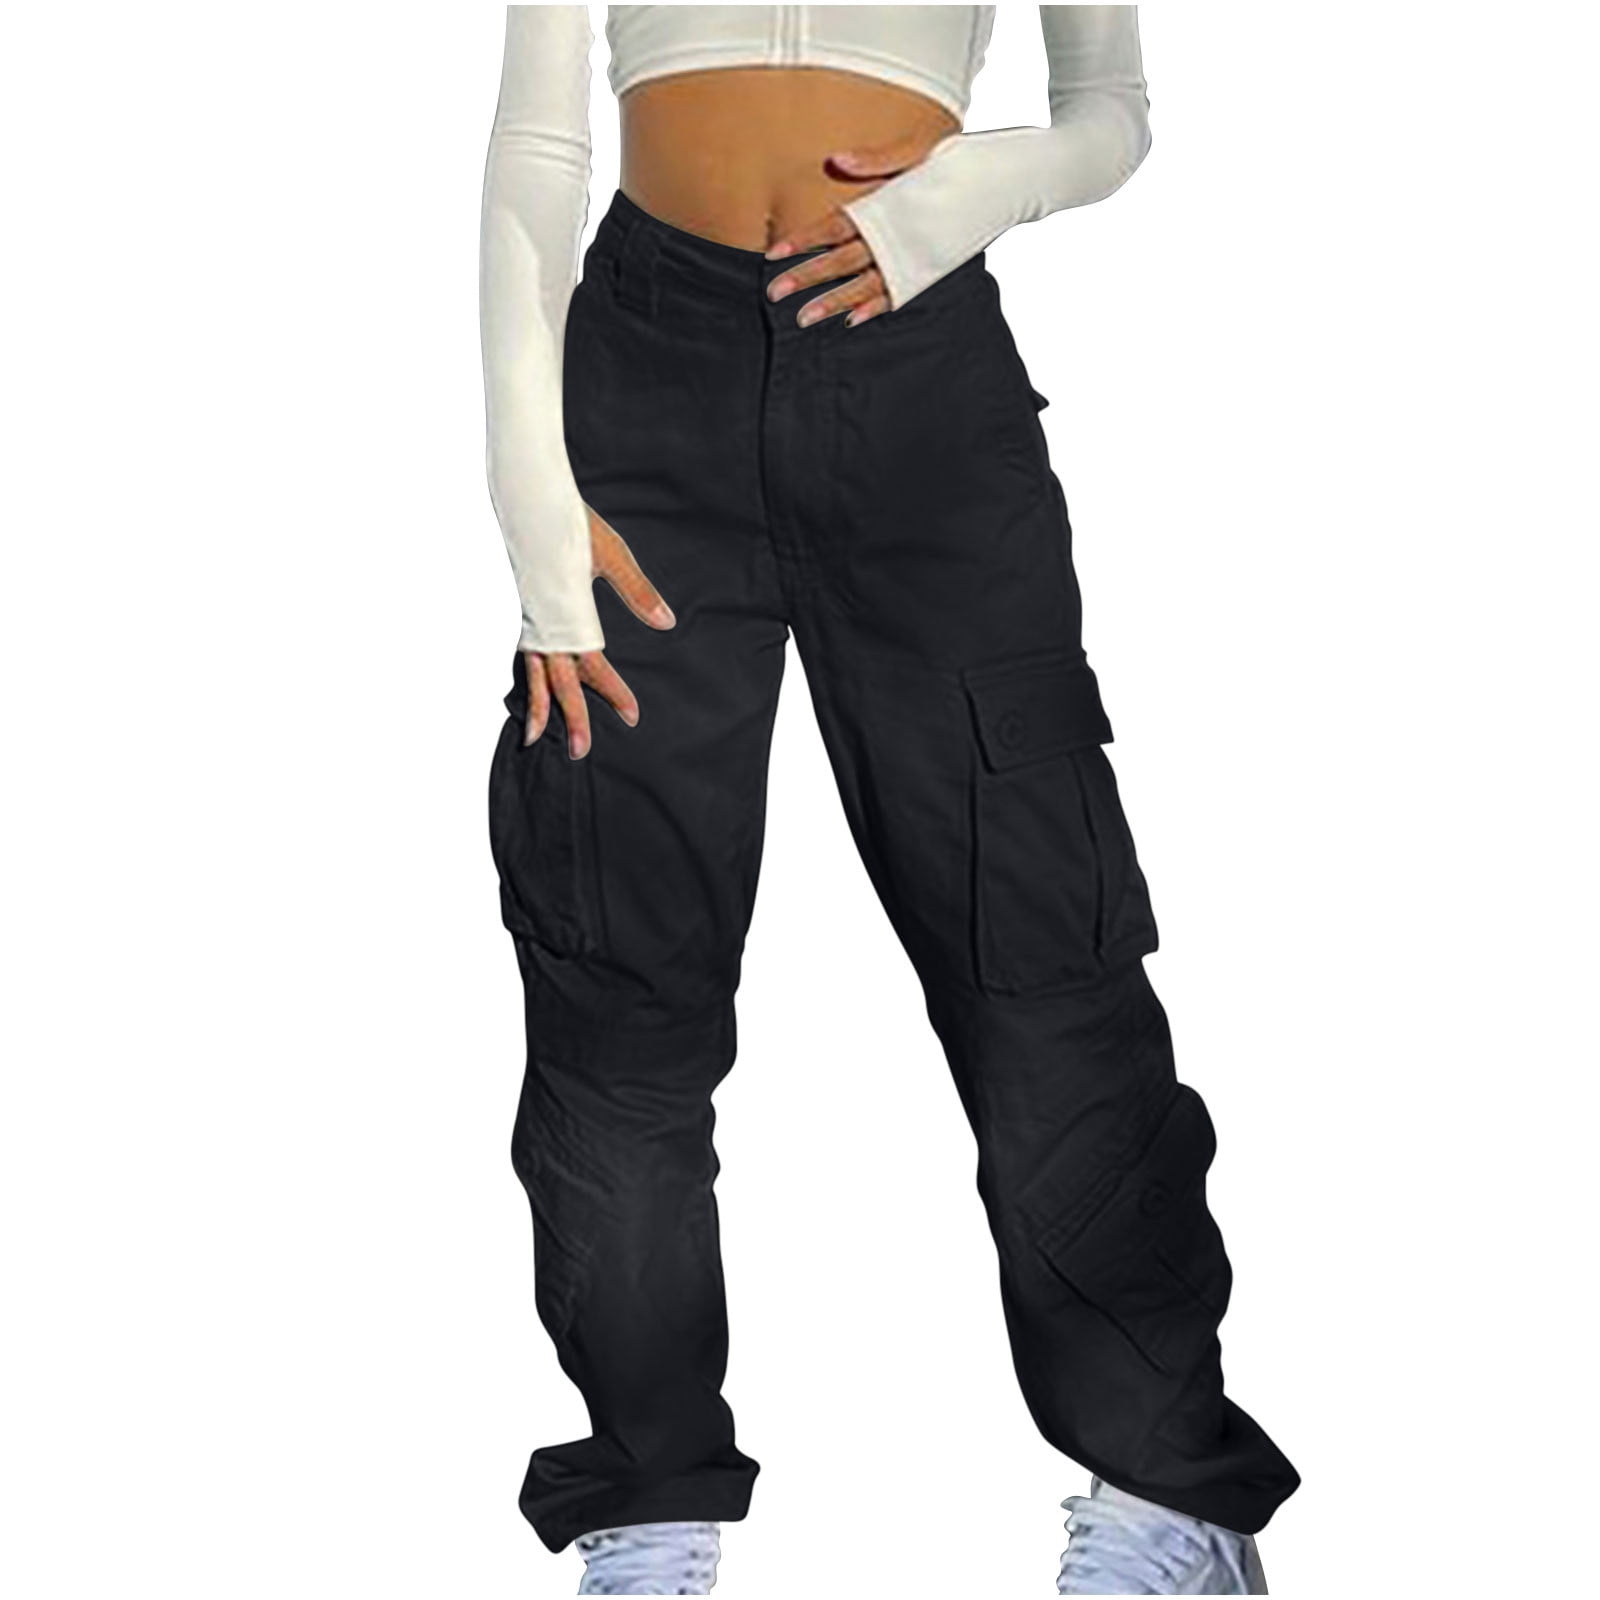 Casual Women's Cargo Pants Baggy Loose Fit Comfy Joggers Lace Up